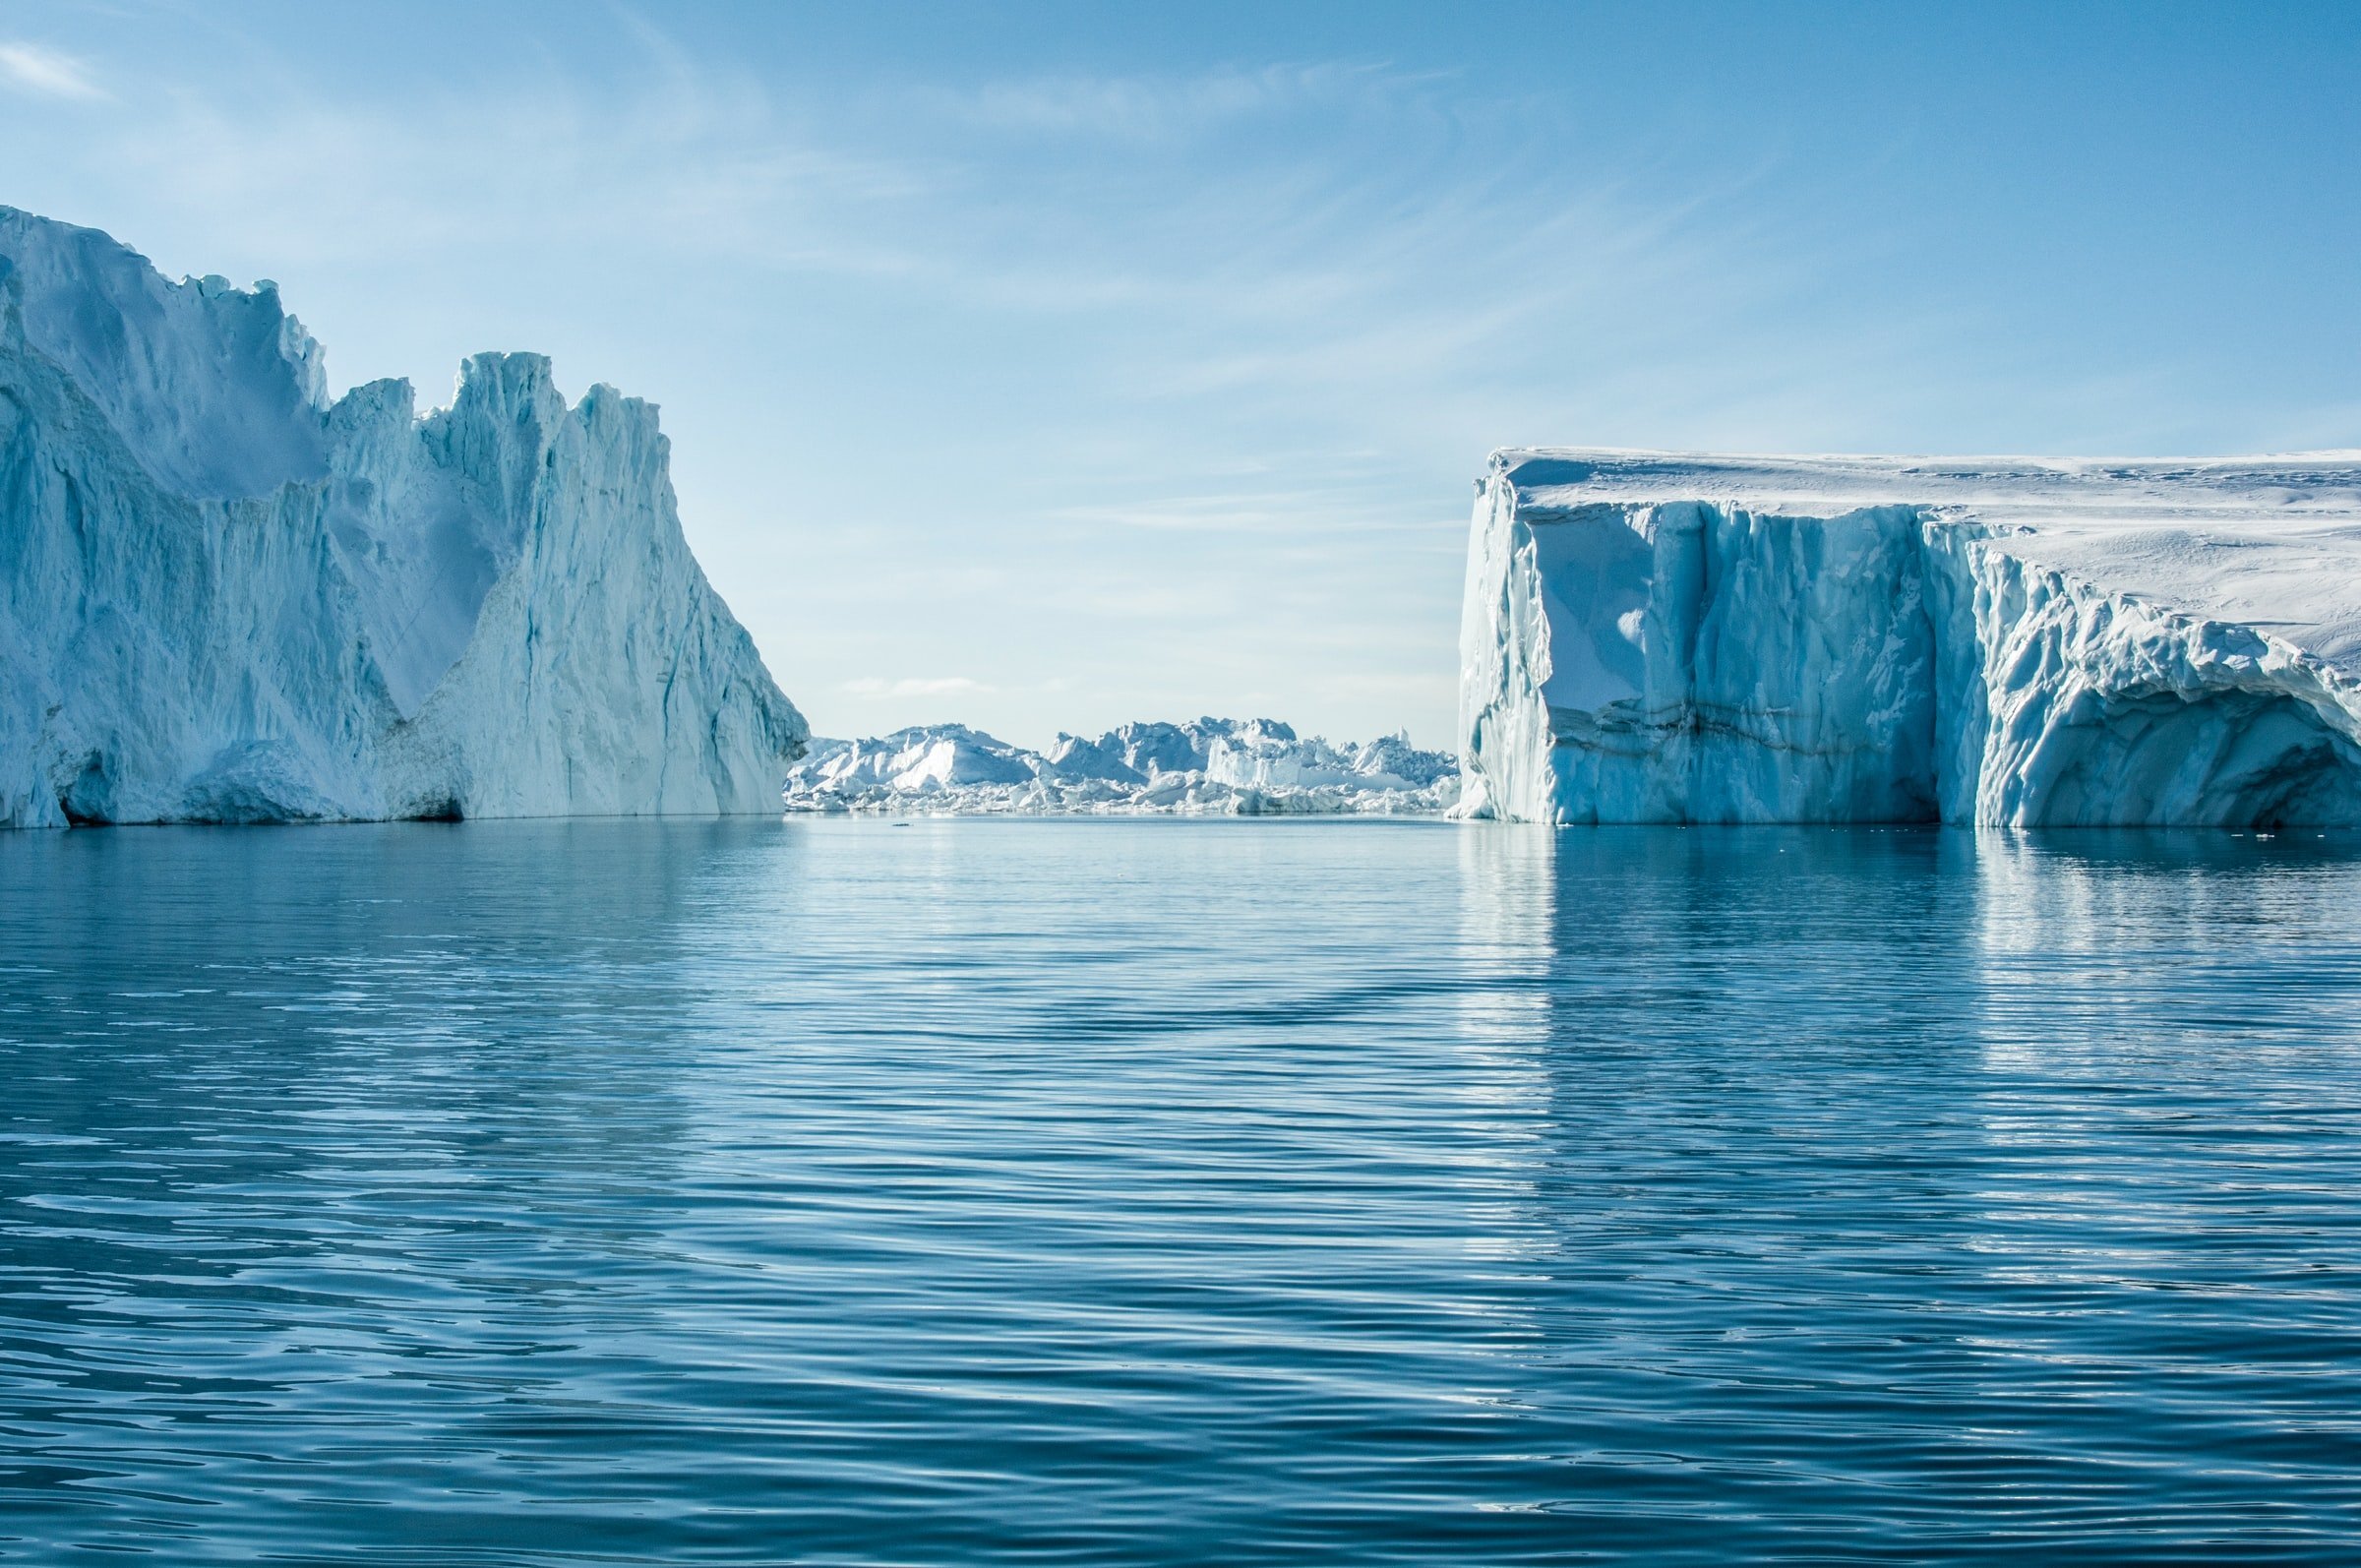 Photos of icebergs in the water.